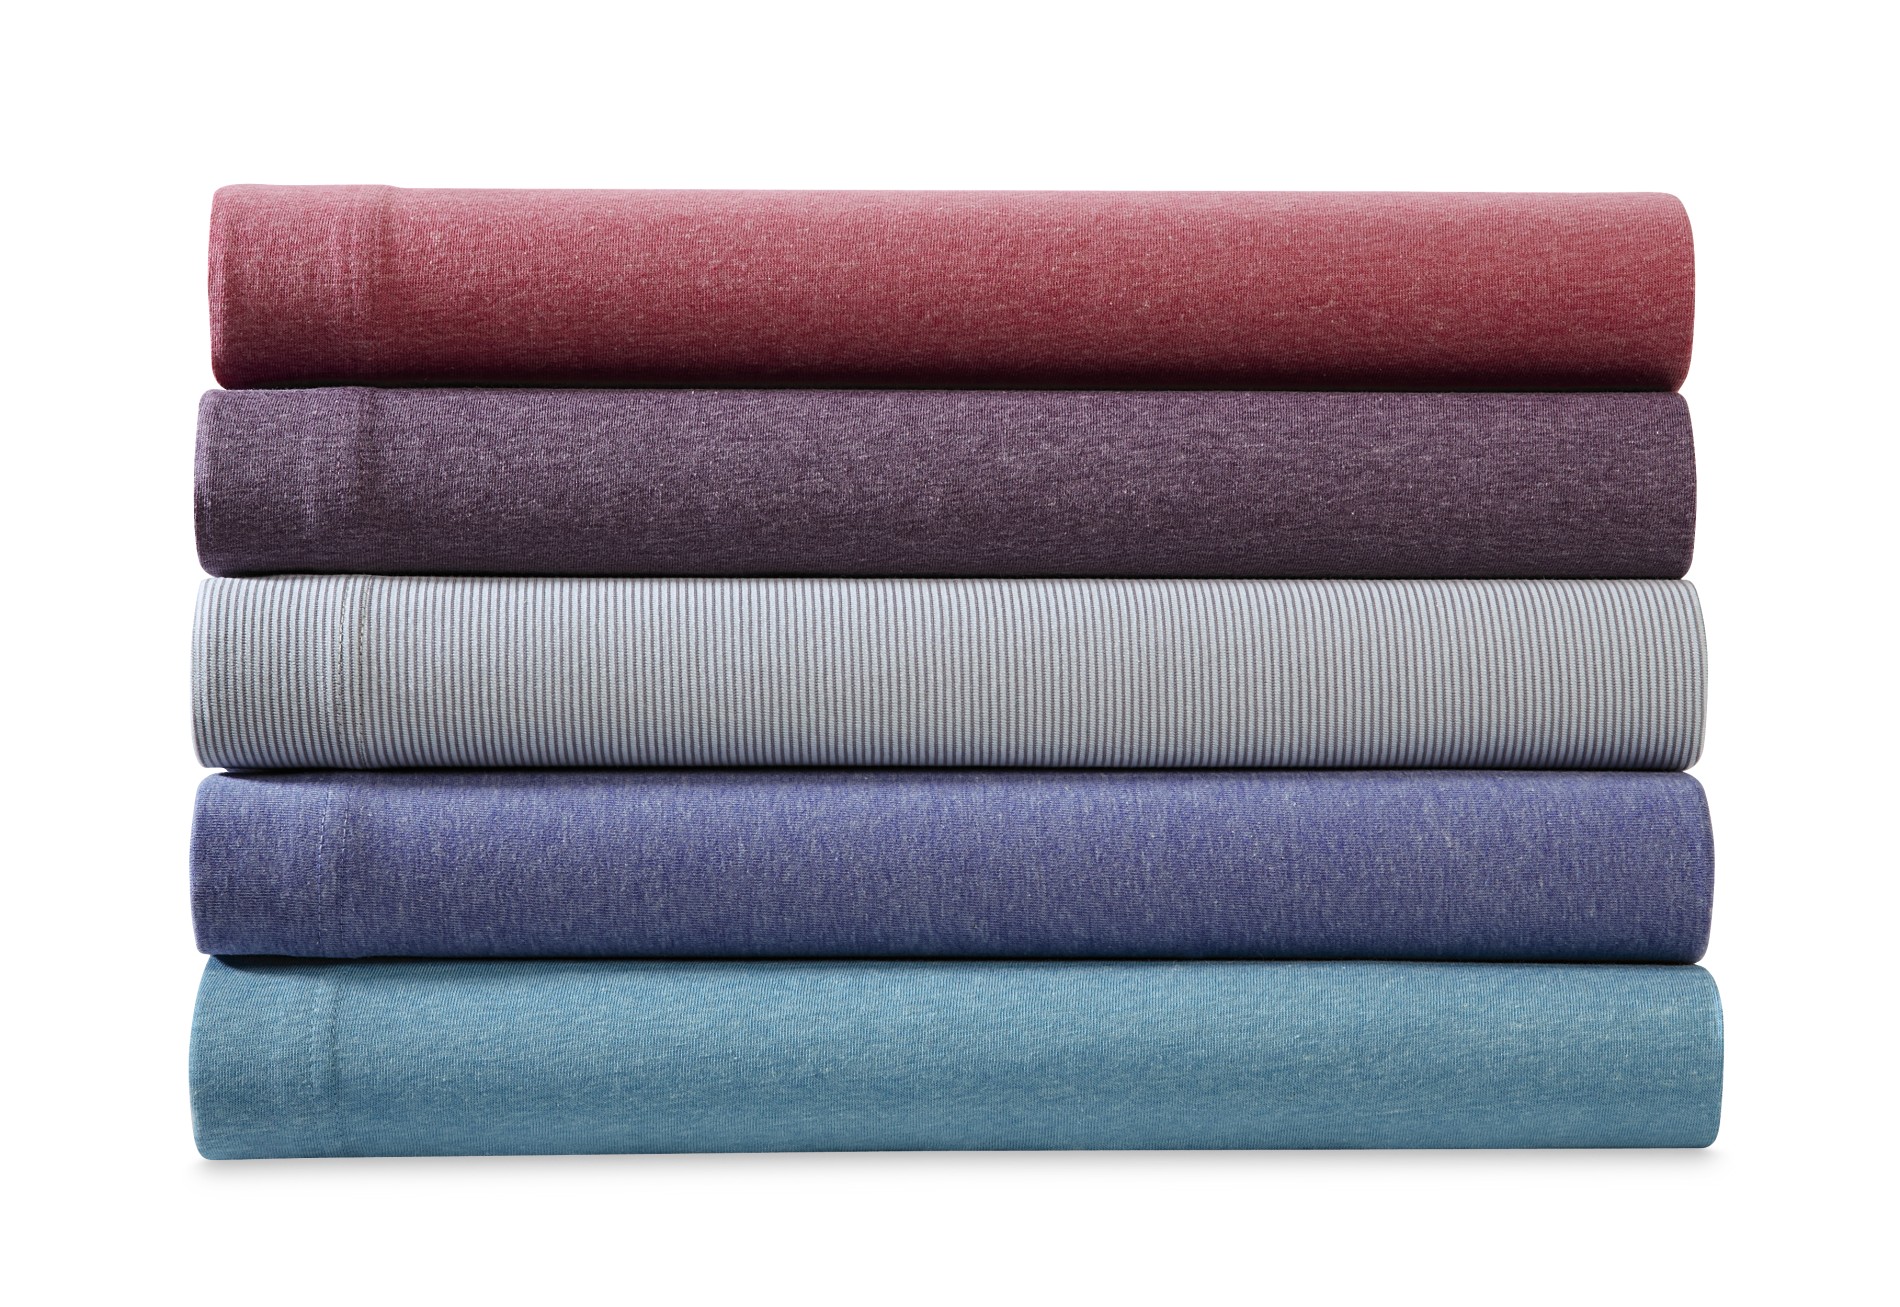 Essential Home Jersey Knit Sheet Set - Home - Bed & Bath - Bedding - Sheets